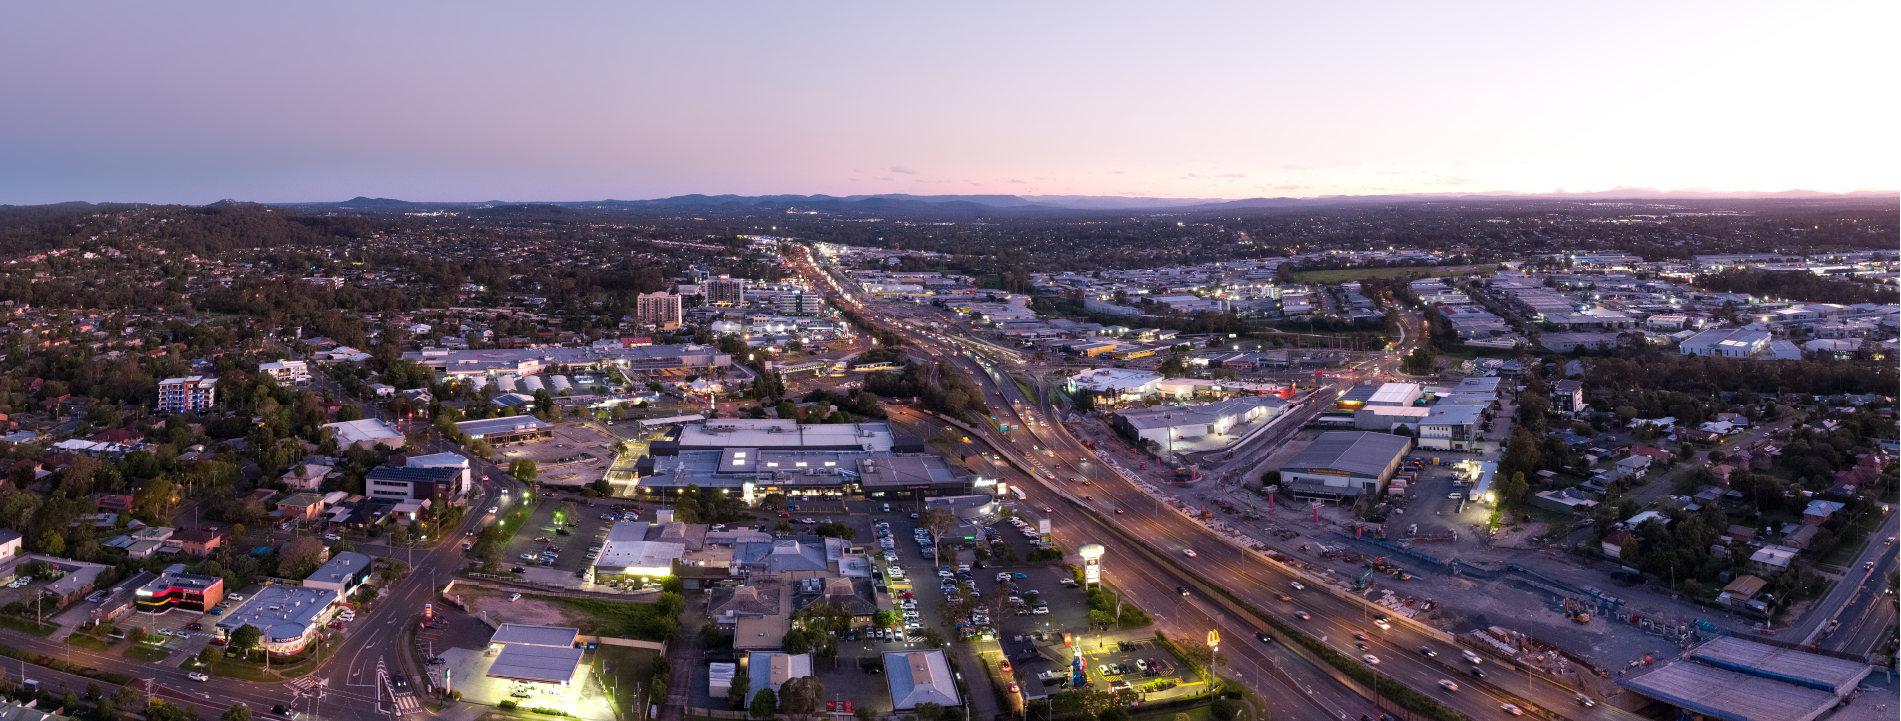 Drone Footage of Springwood in the City of Logan